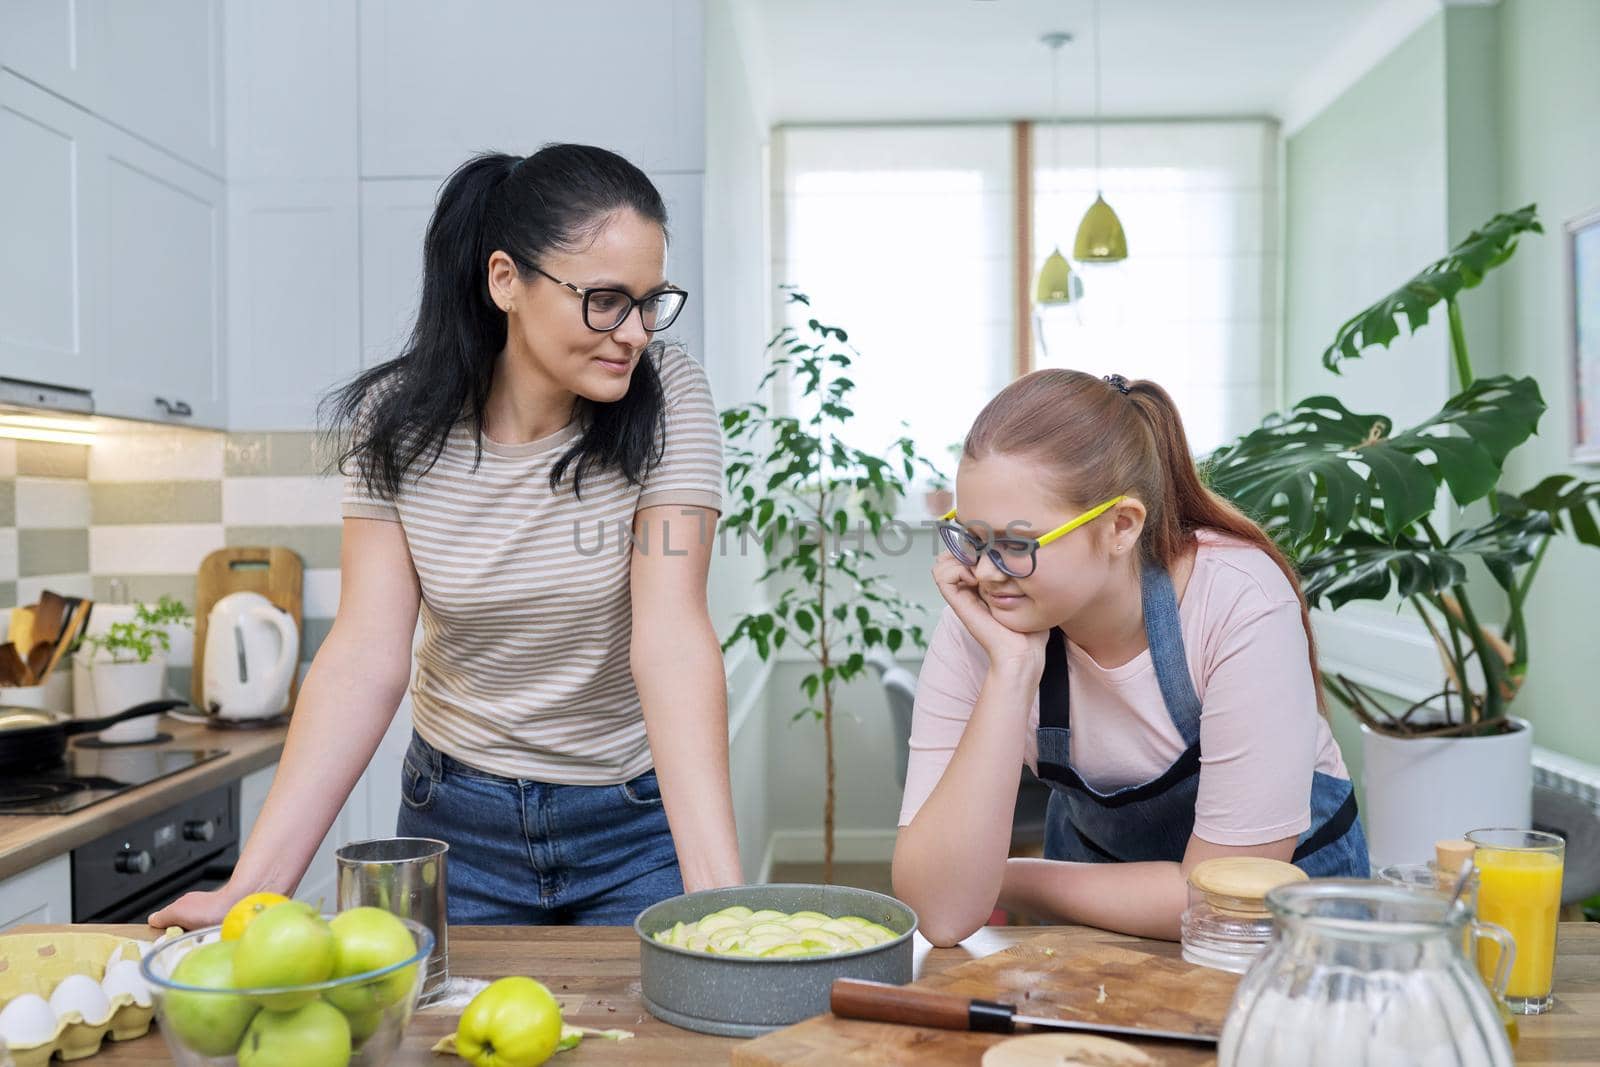 Mother and teenage daughter cooking at home in kitchen. Mom and girl making apple pie together, talking smiling. Relationships, communication parent teenager, healthy homemade food, family concept